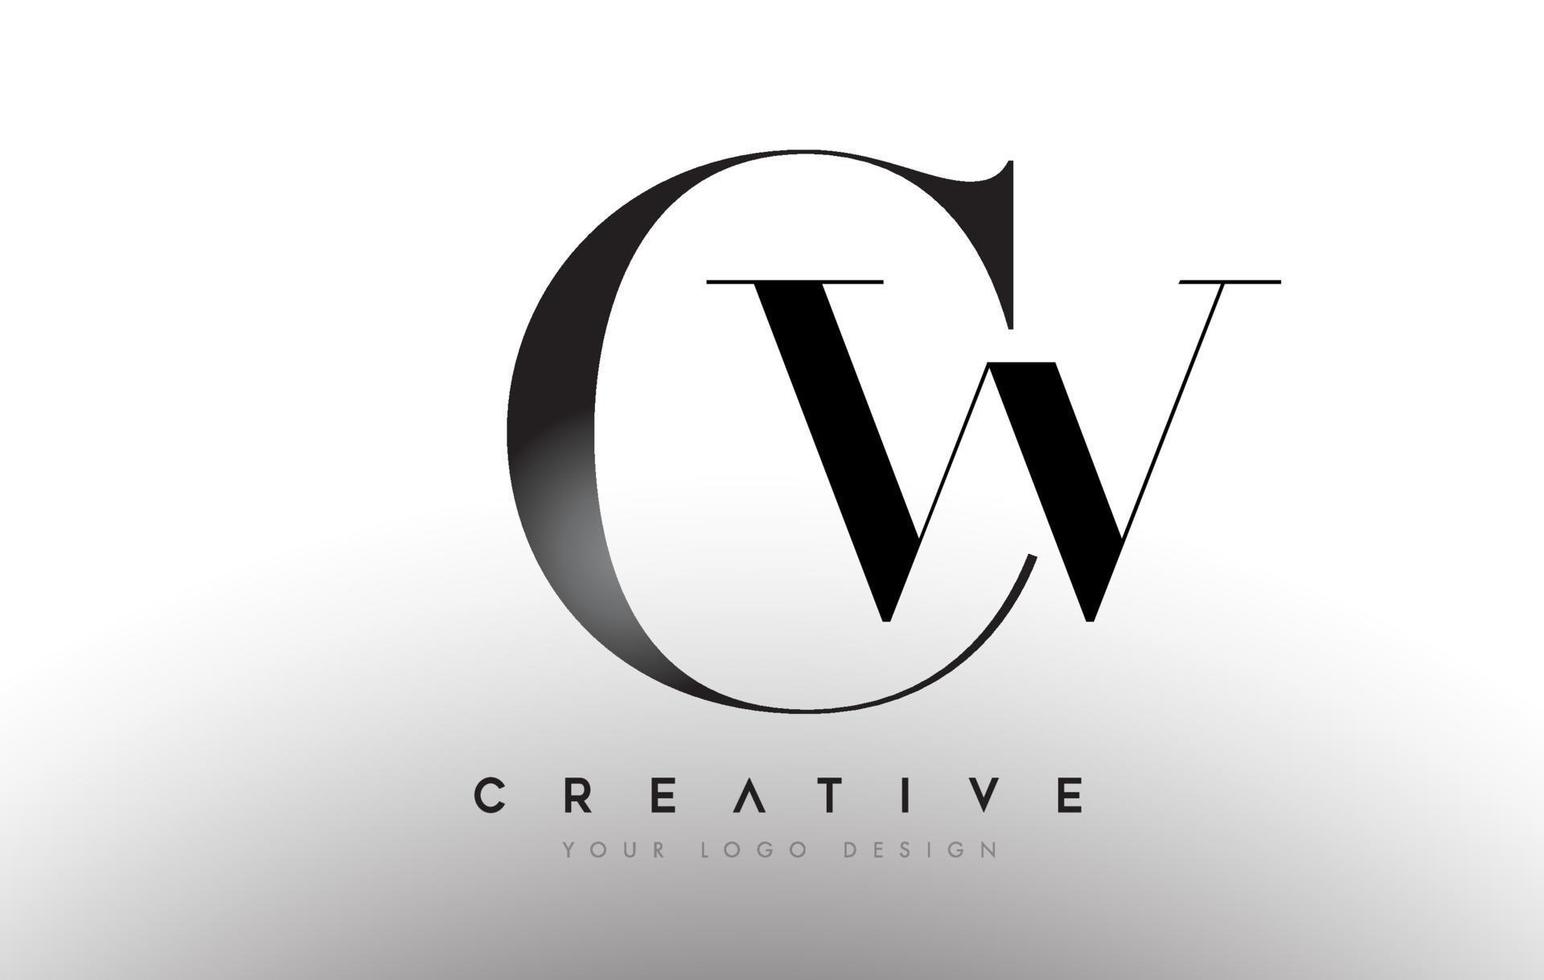 CW cw letter design logo logotype icon concept with serif font and classic elegant style look vector